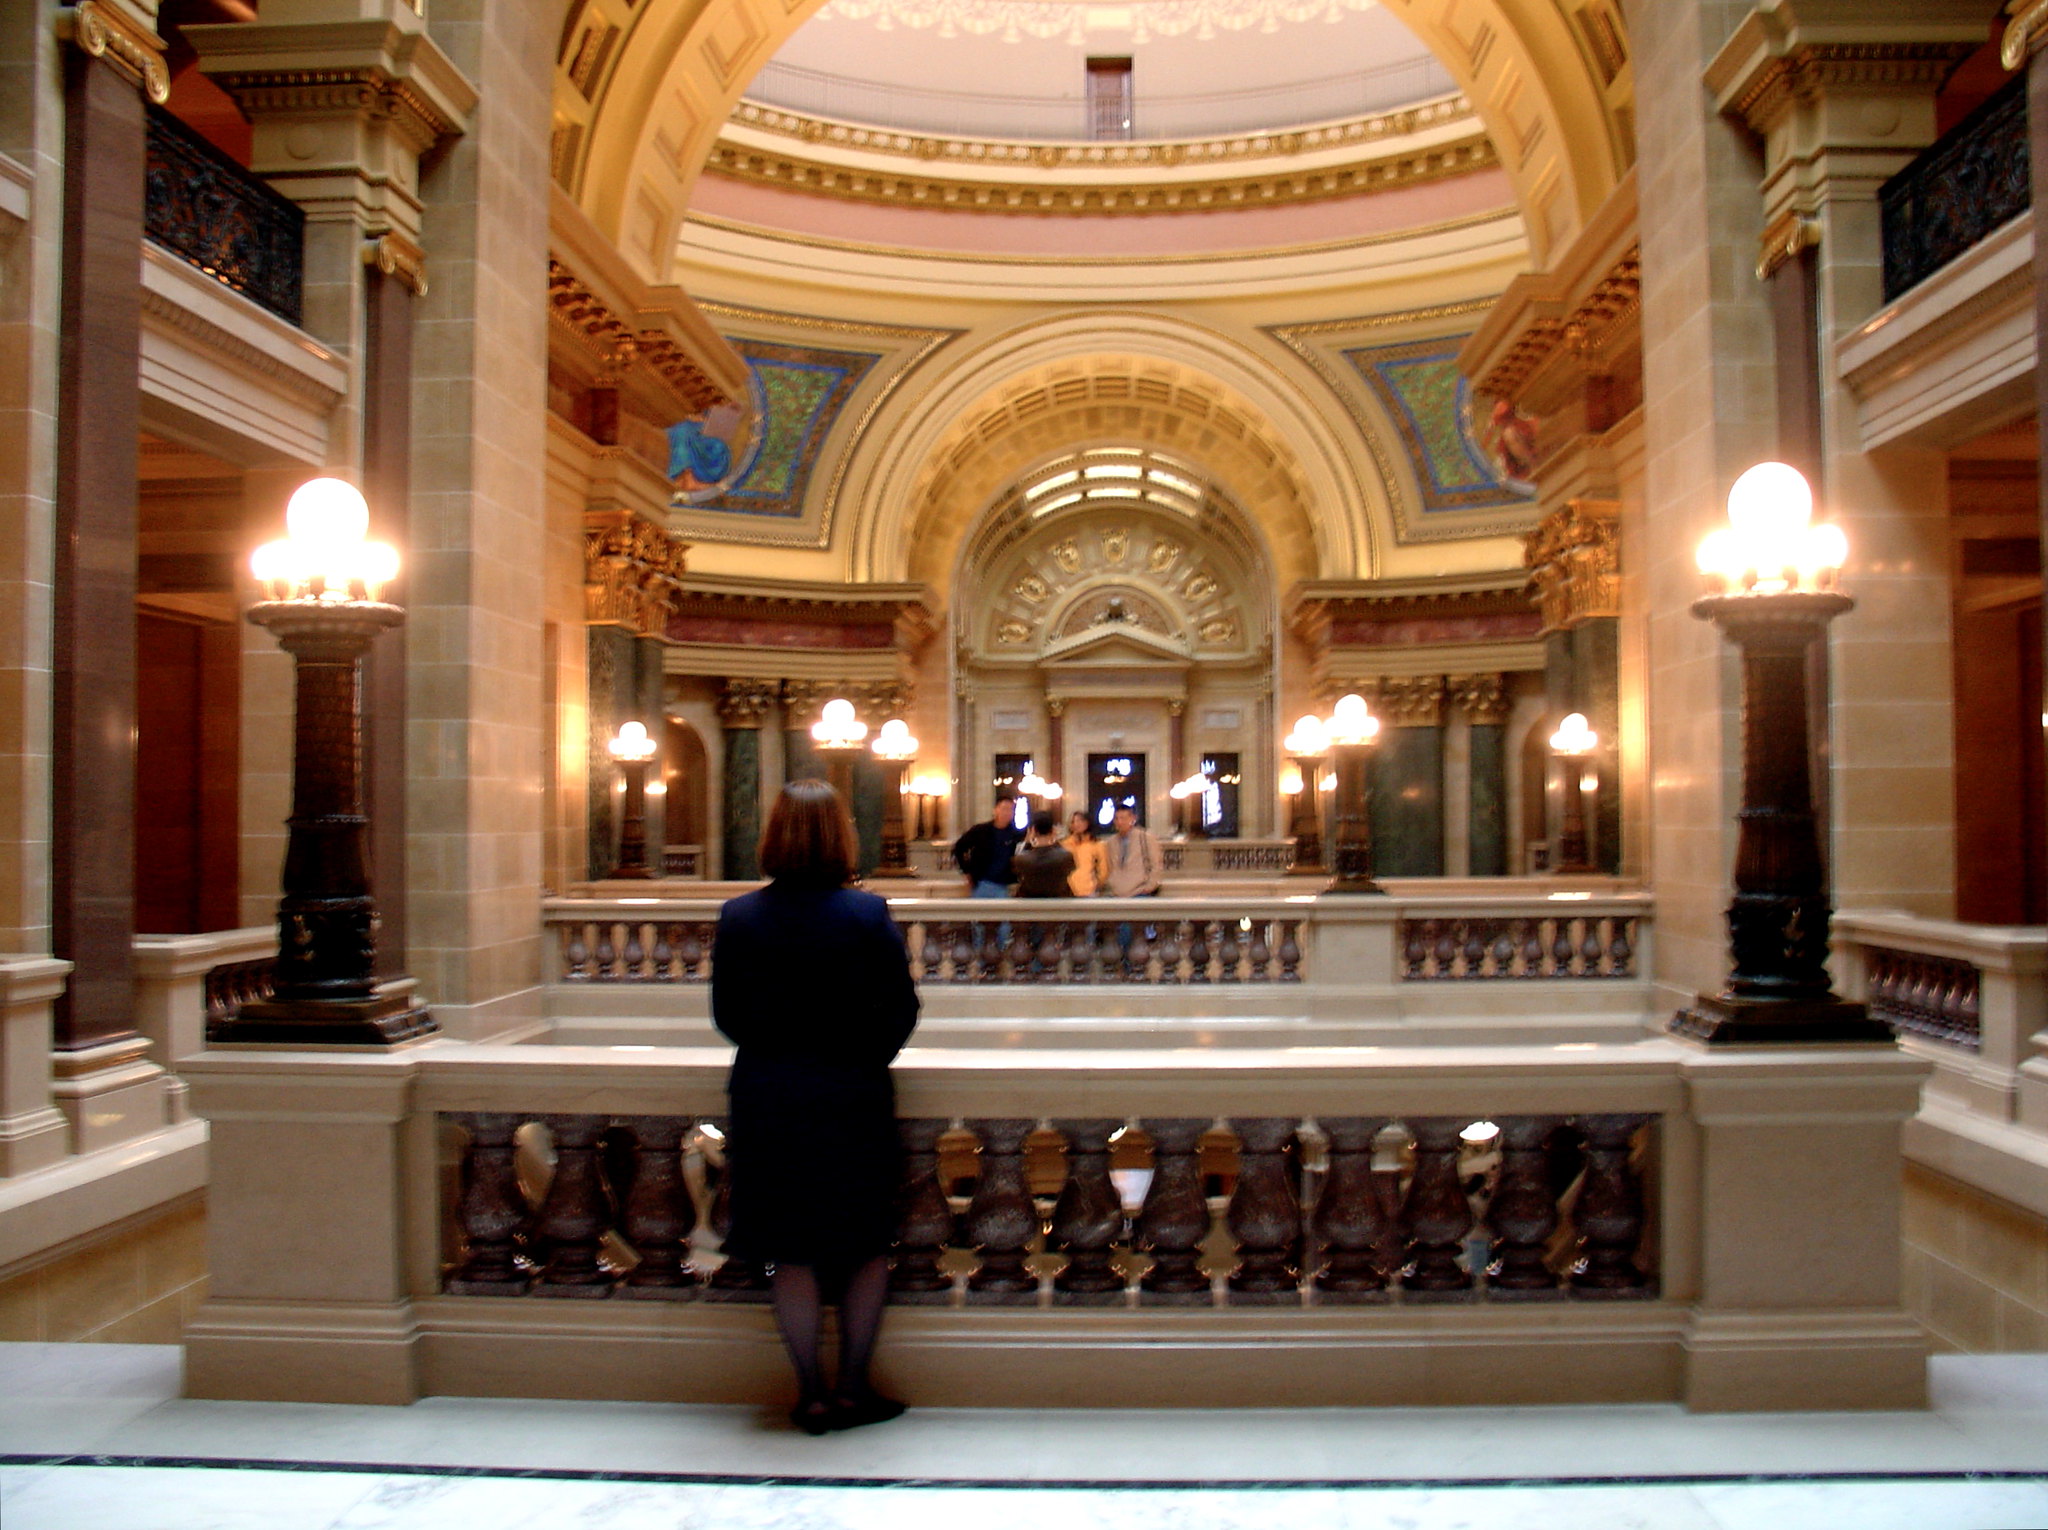 The Wisconsin Supreme Court